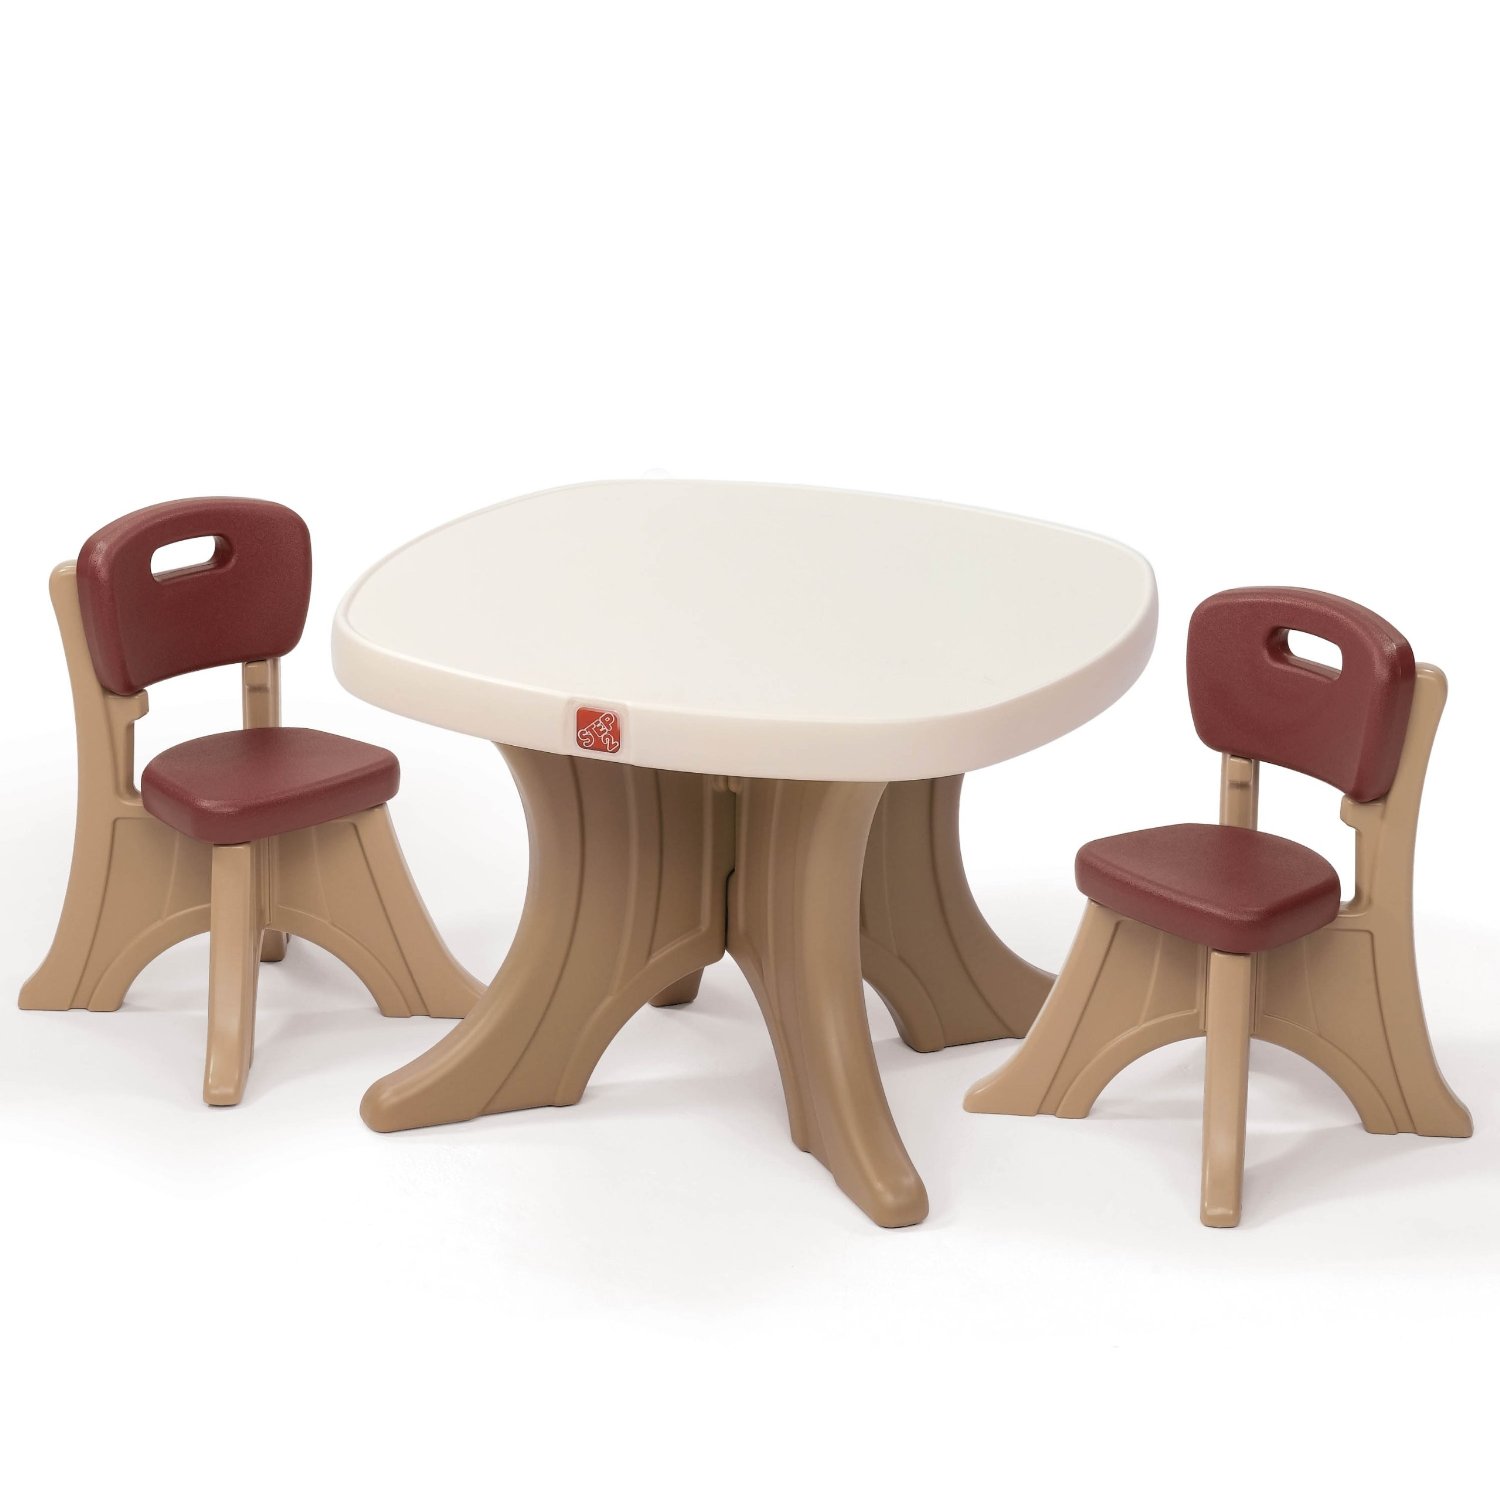 argos children's table and chair set